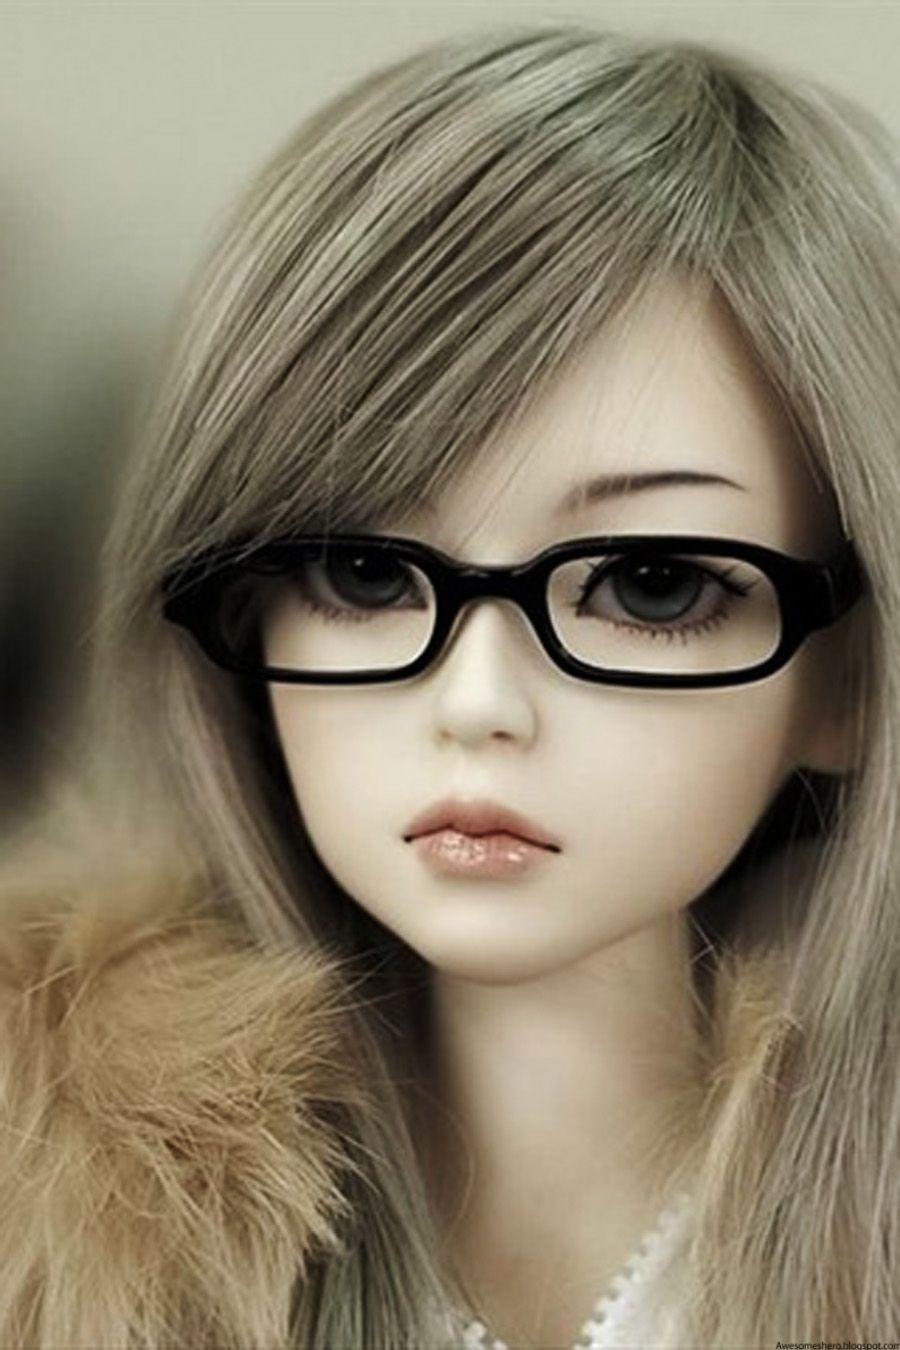 Doll Image: Find best latest Doll Image in HD for your PC desktop